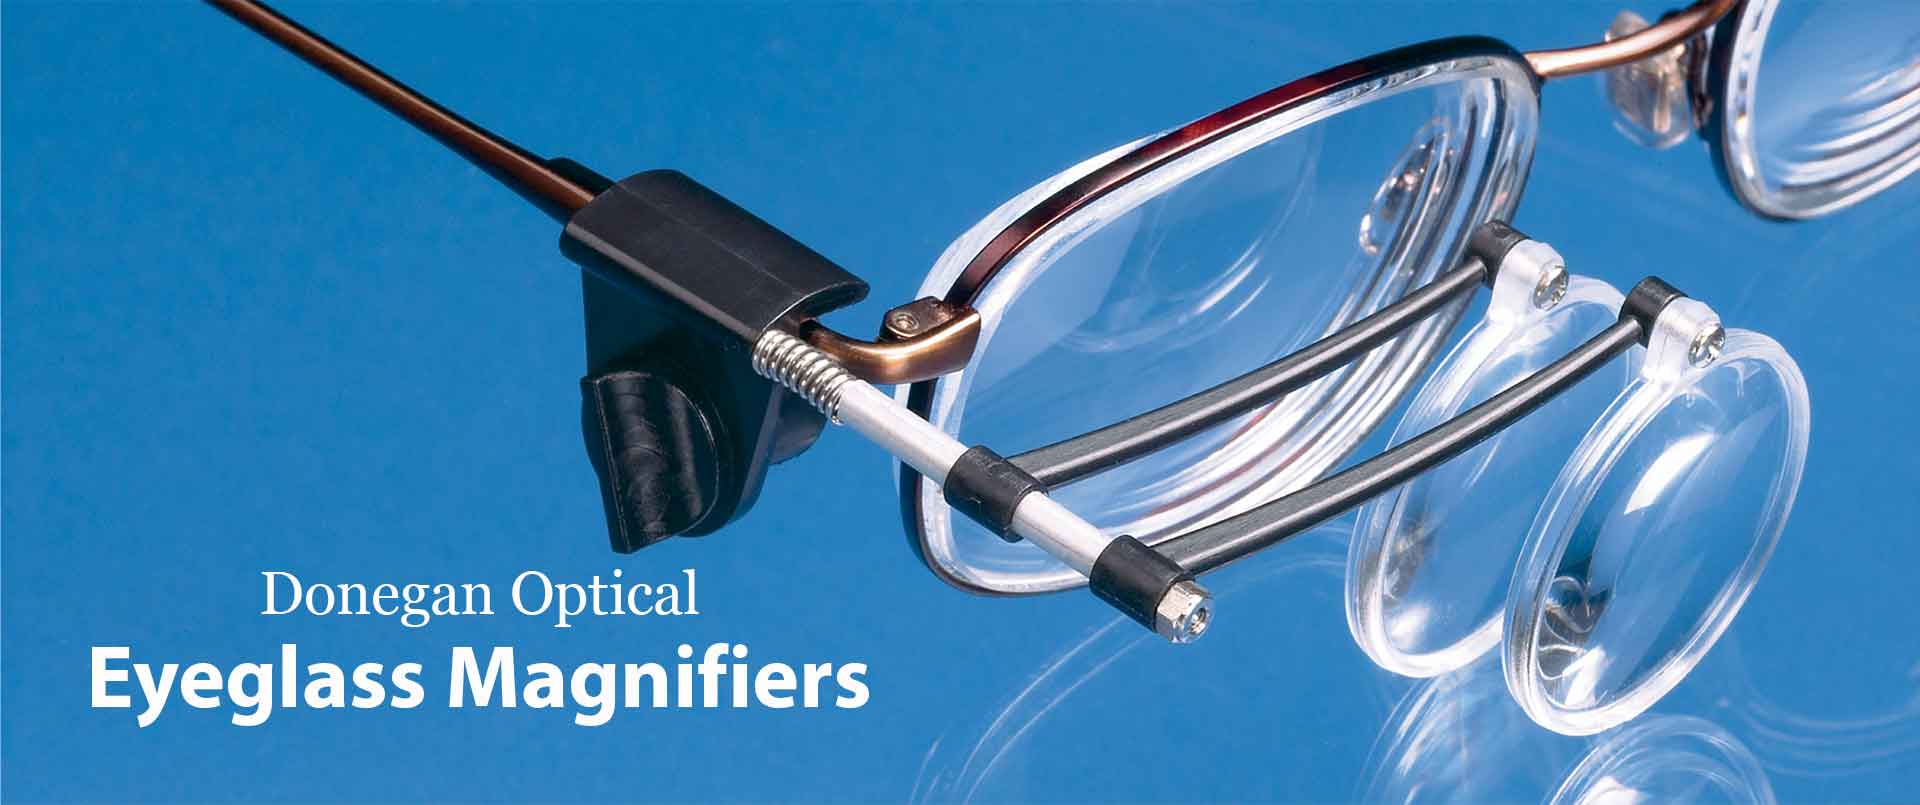 Eyeglass Magnifiers Archives - Donegan Optical Company, Inc.